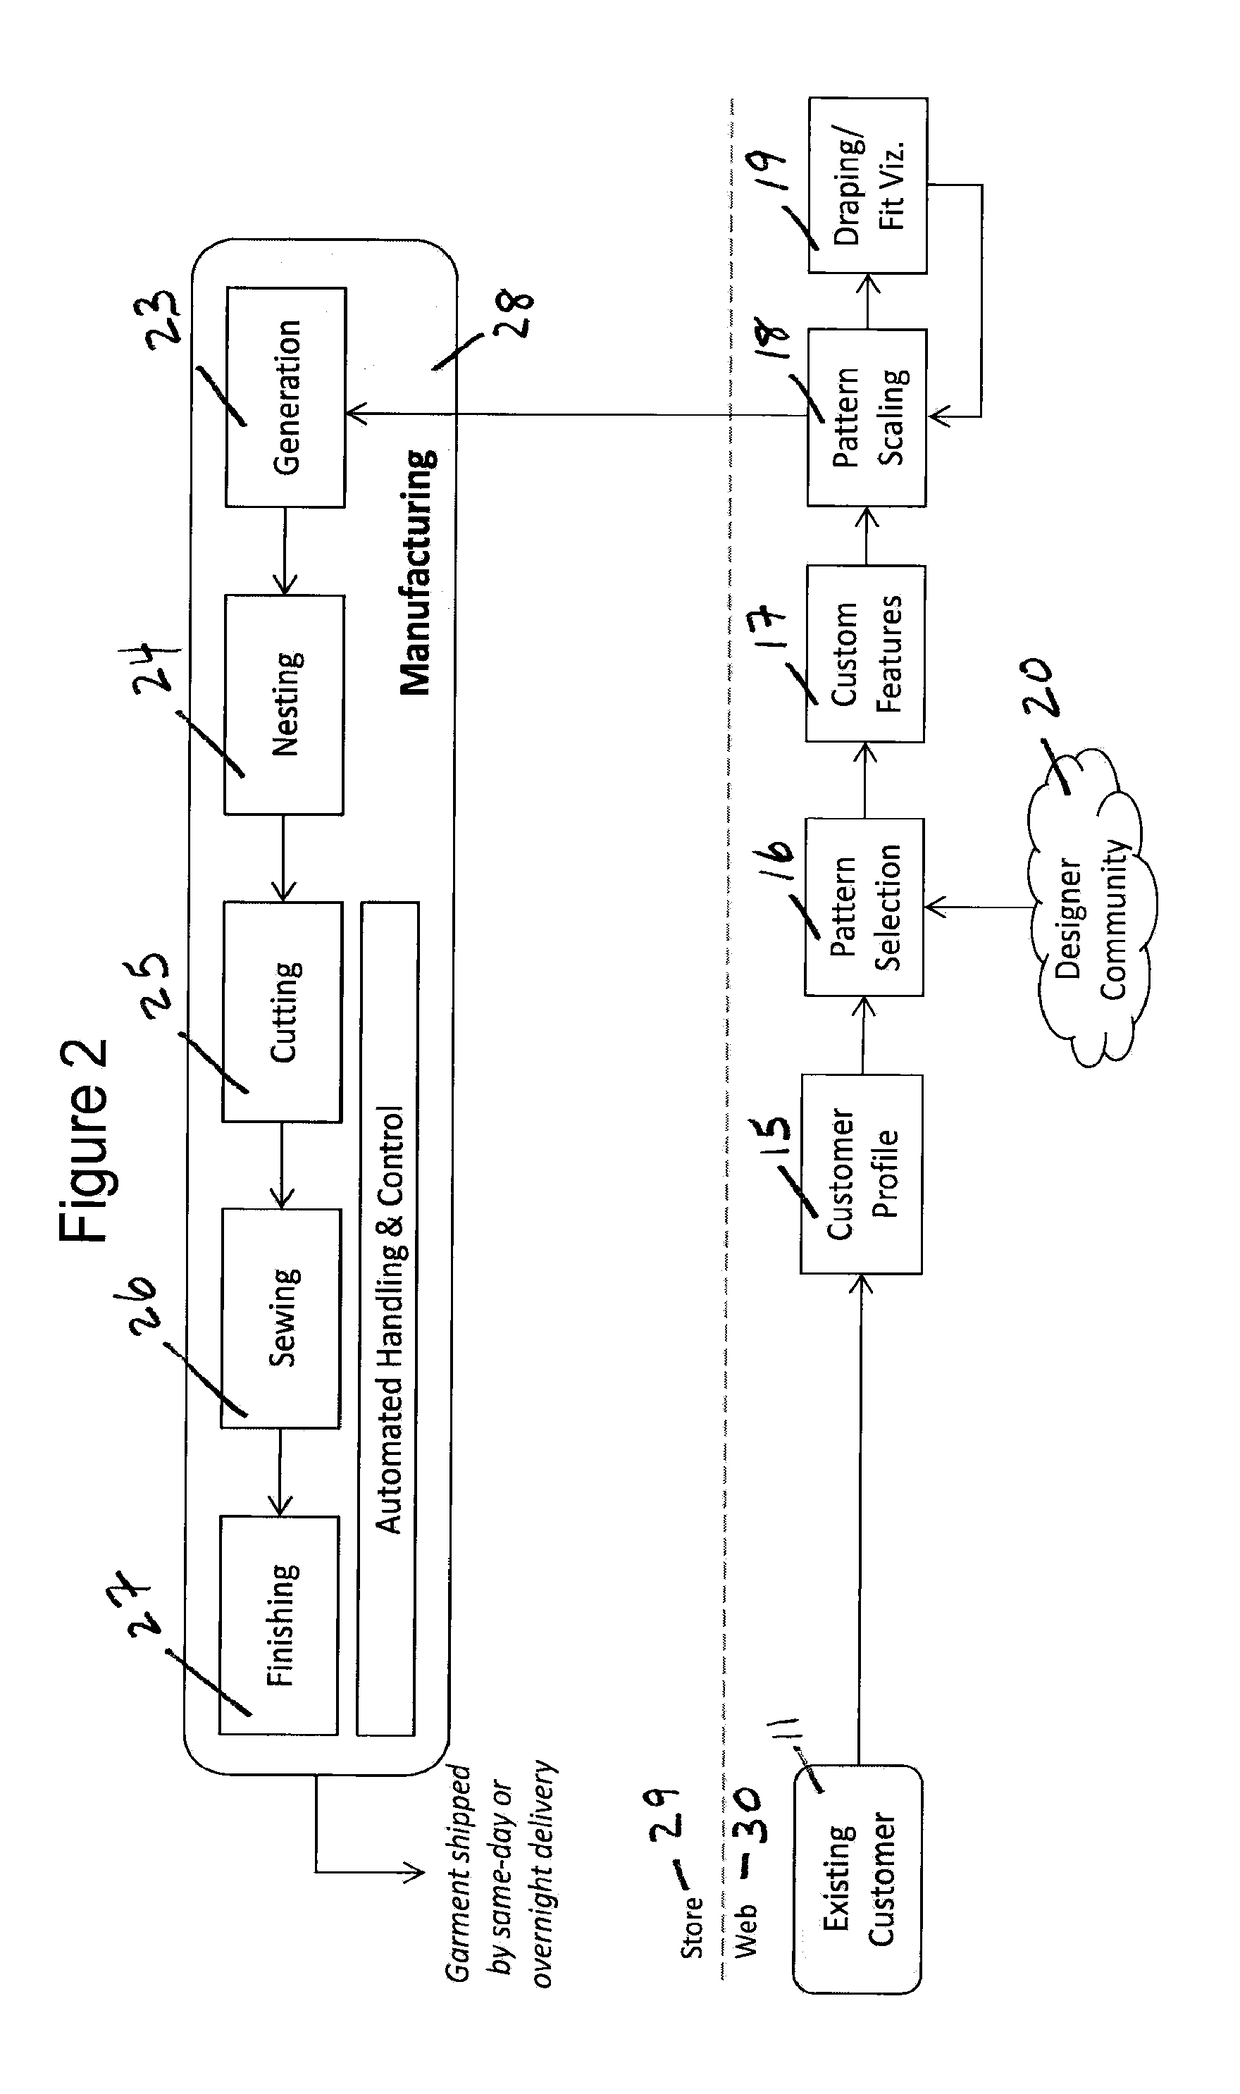 System and Method for Automated Manufacturing of Custom Apparel